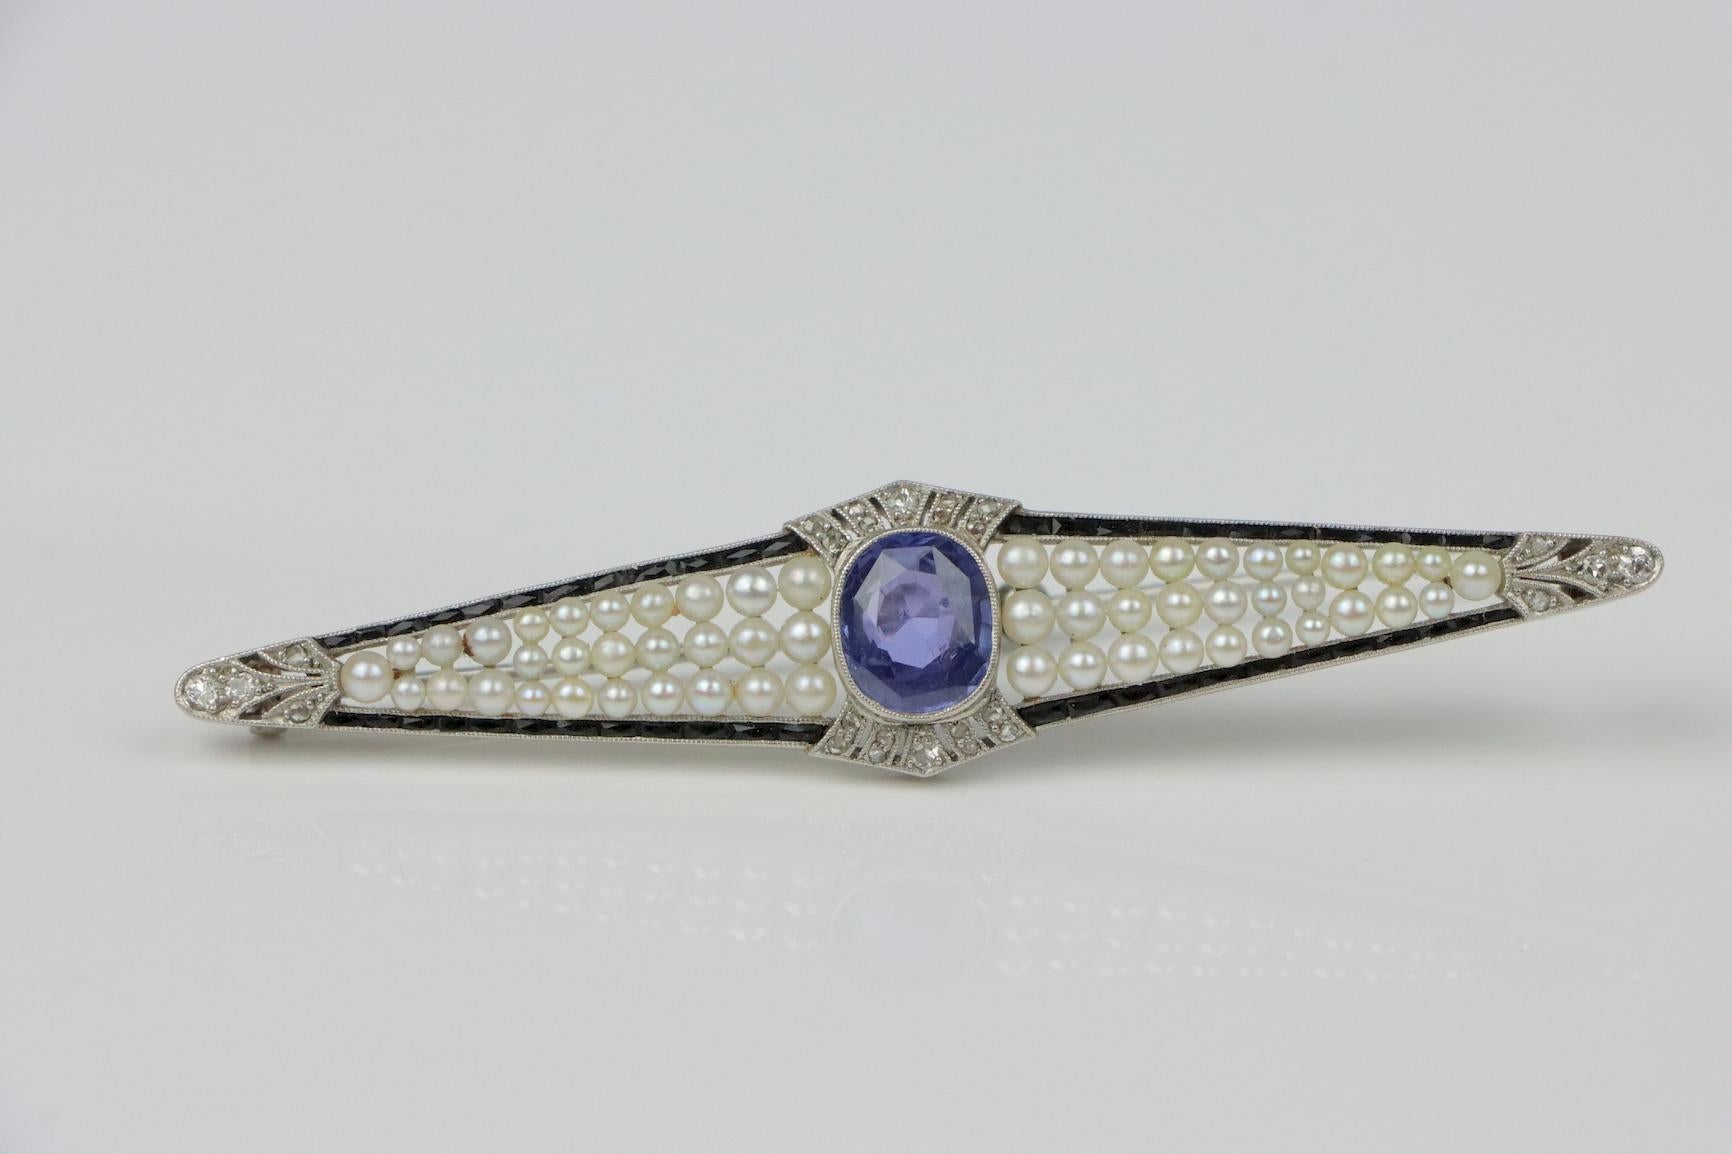 Art Deco Platinum Pearl & Ceylon Unheated Sapphire Brooch Pin  
AGL Certified 

Accompanied by AGL Report 1116818 - August 30th, 2021
The report states that the Oval Blue Sapphire is of Ceylon (Sri Lanka) Natural Color - Unheated Origin.
The